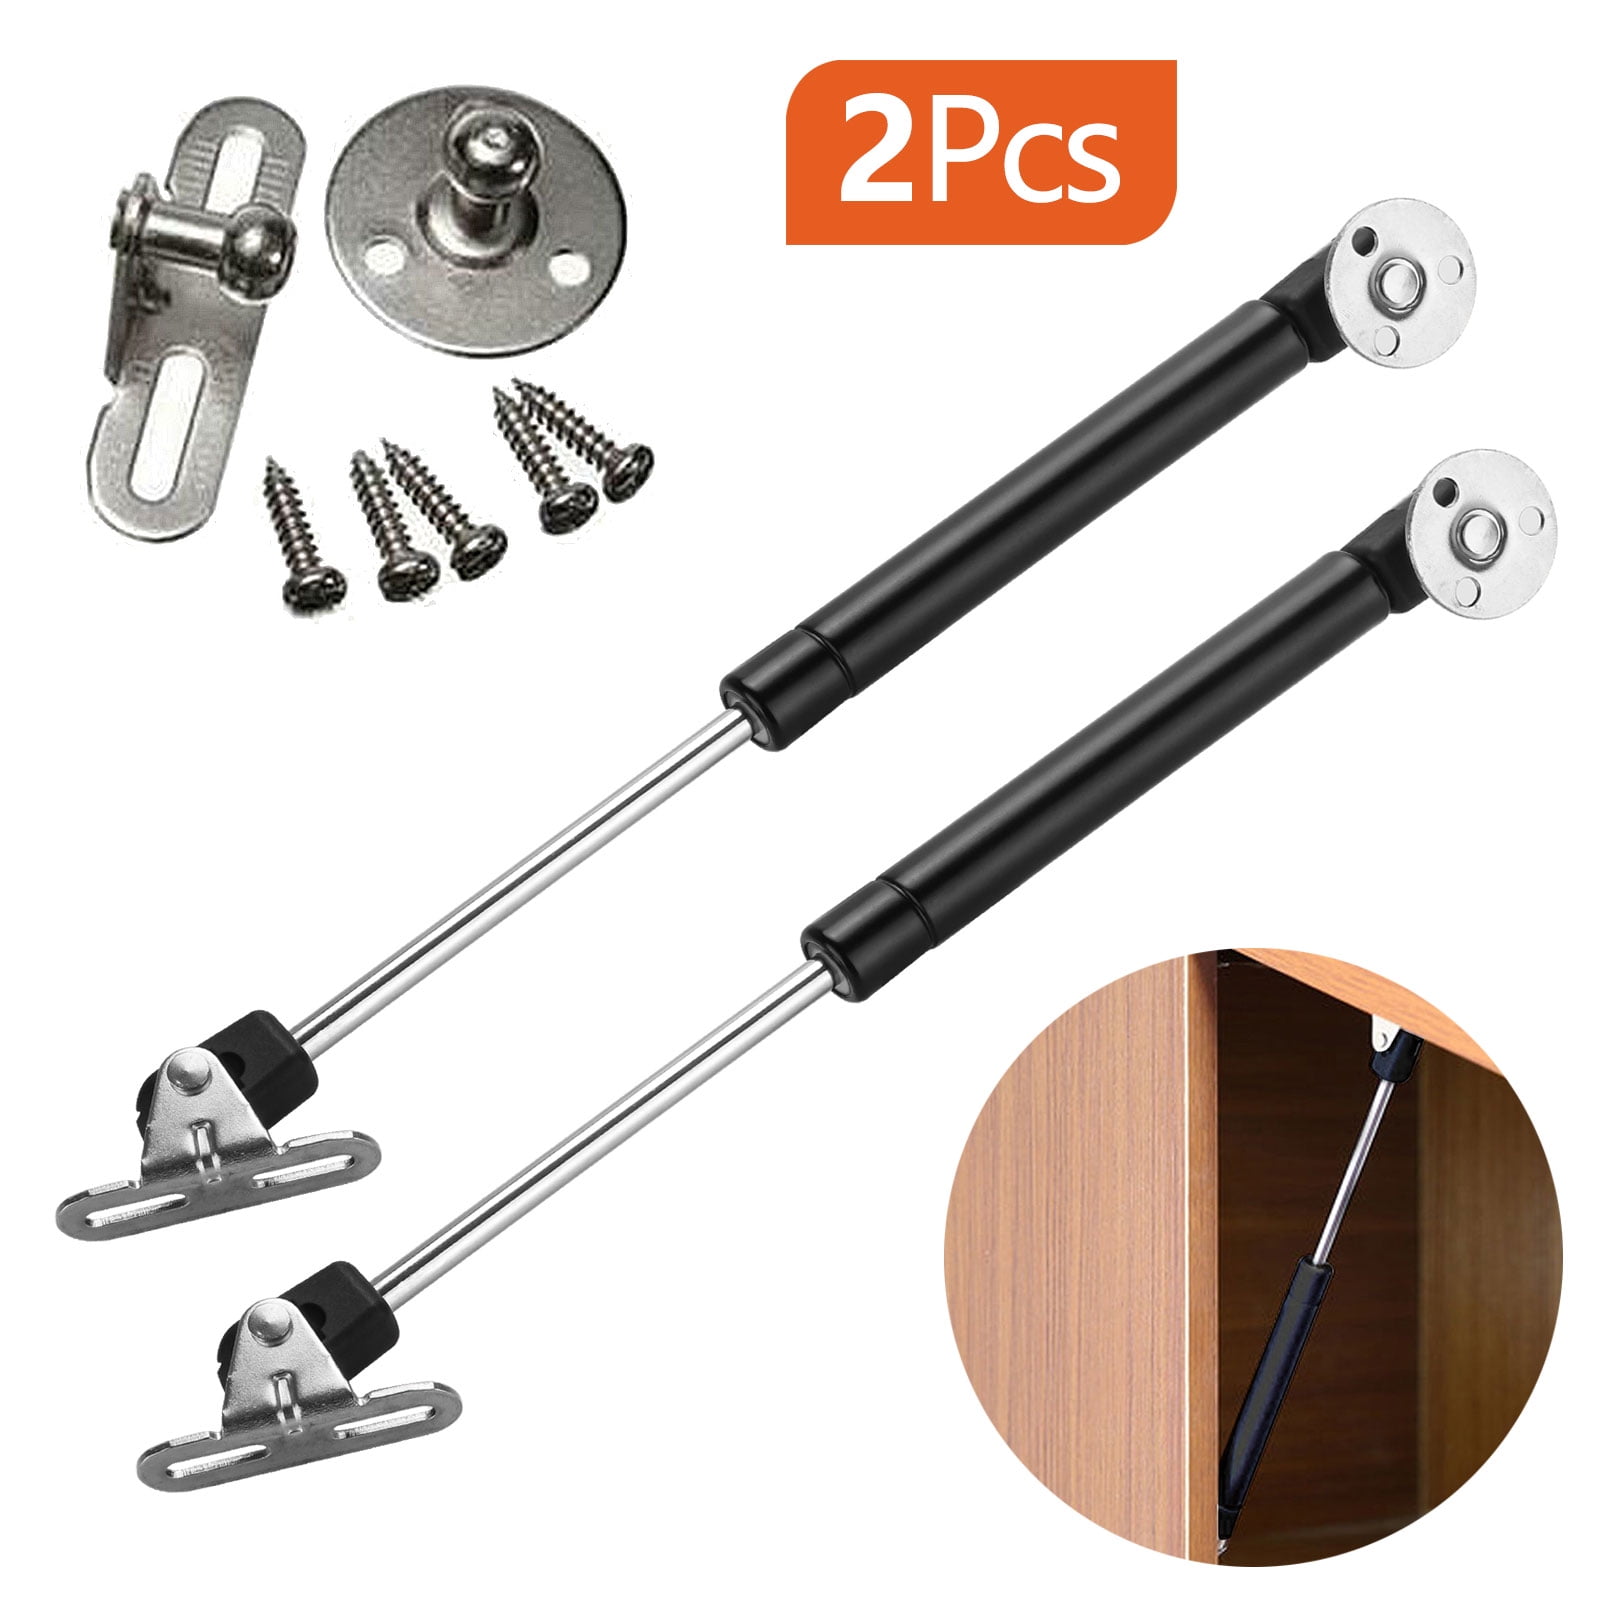 2Pcs Alloy Gas Struts Spring Lifter for Kitchen Cupboard Cabinets Door Stay 